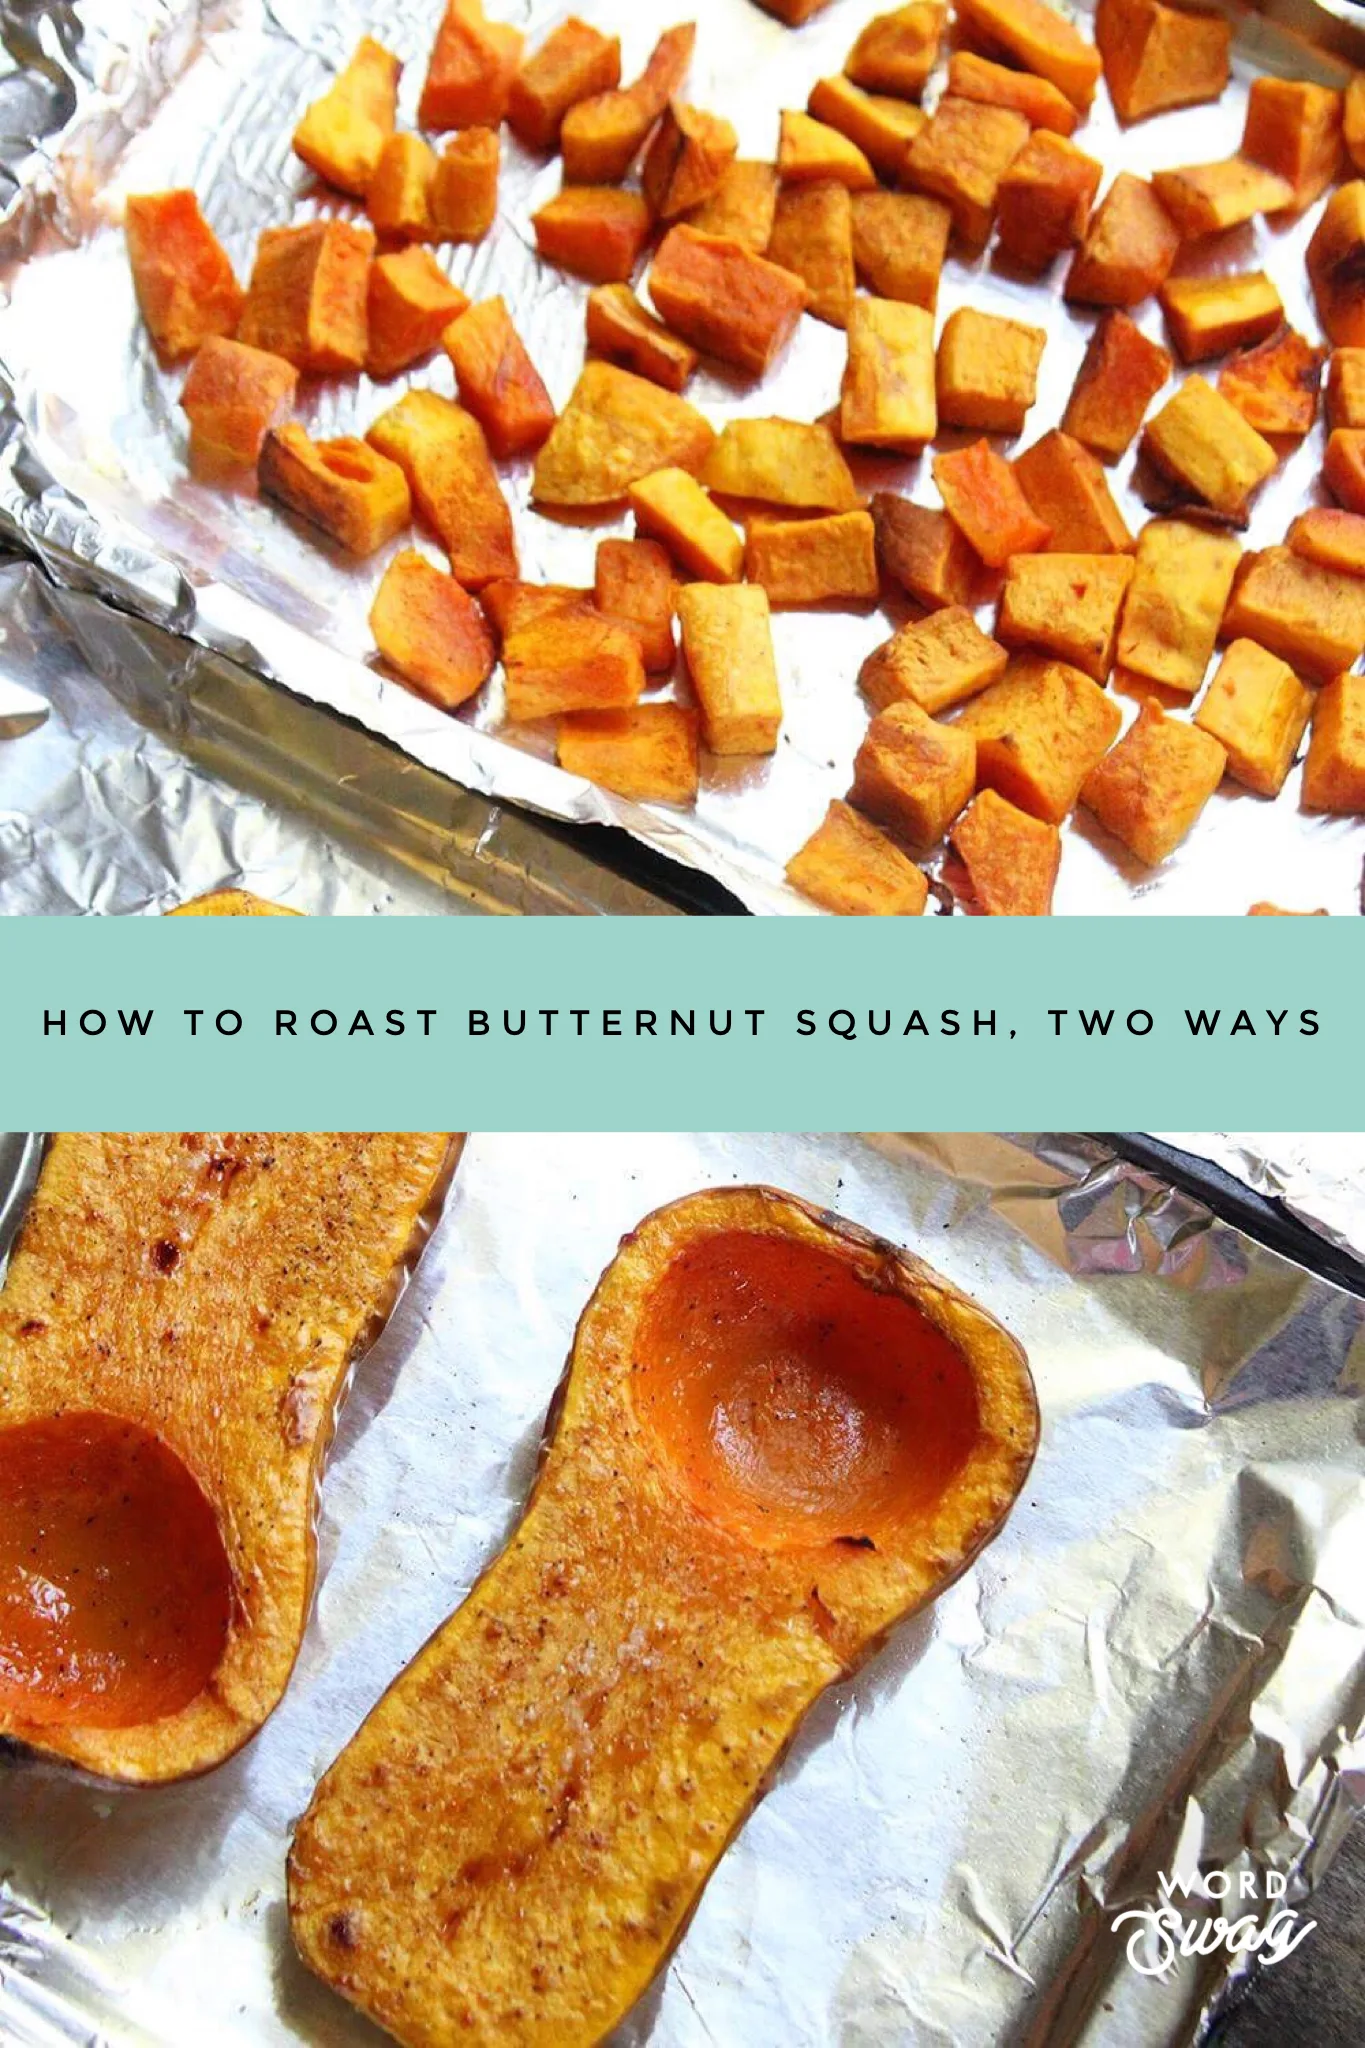 How to Roast Butternut Squash Two Ways